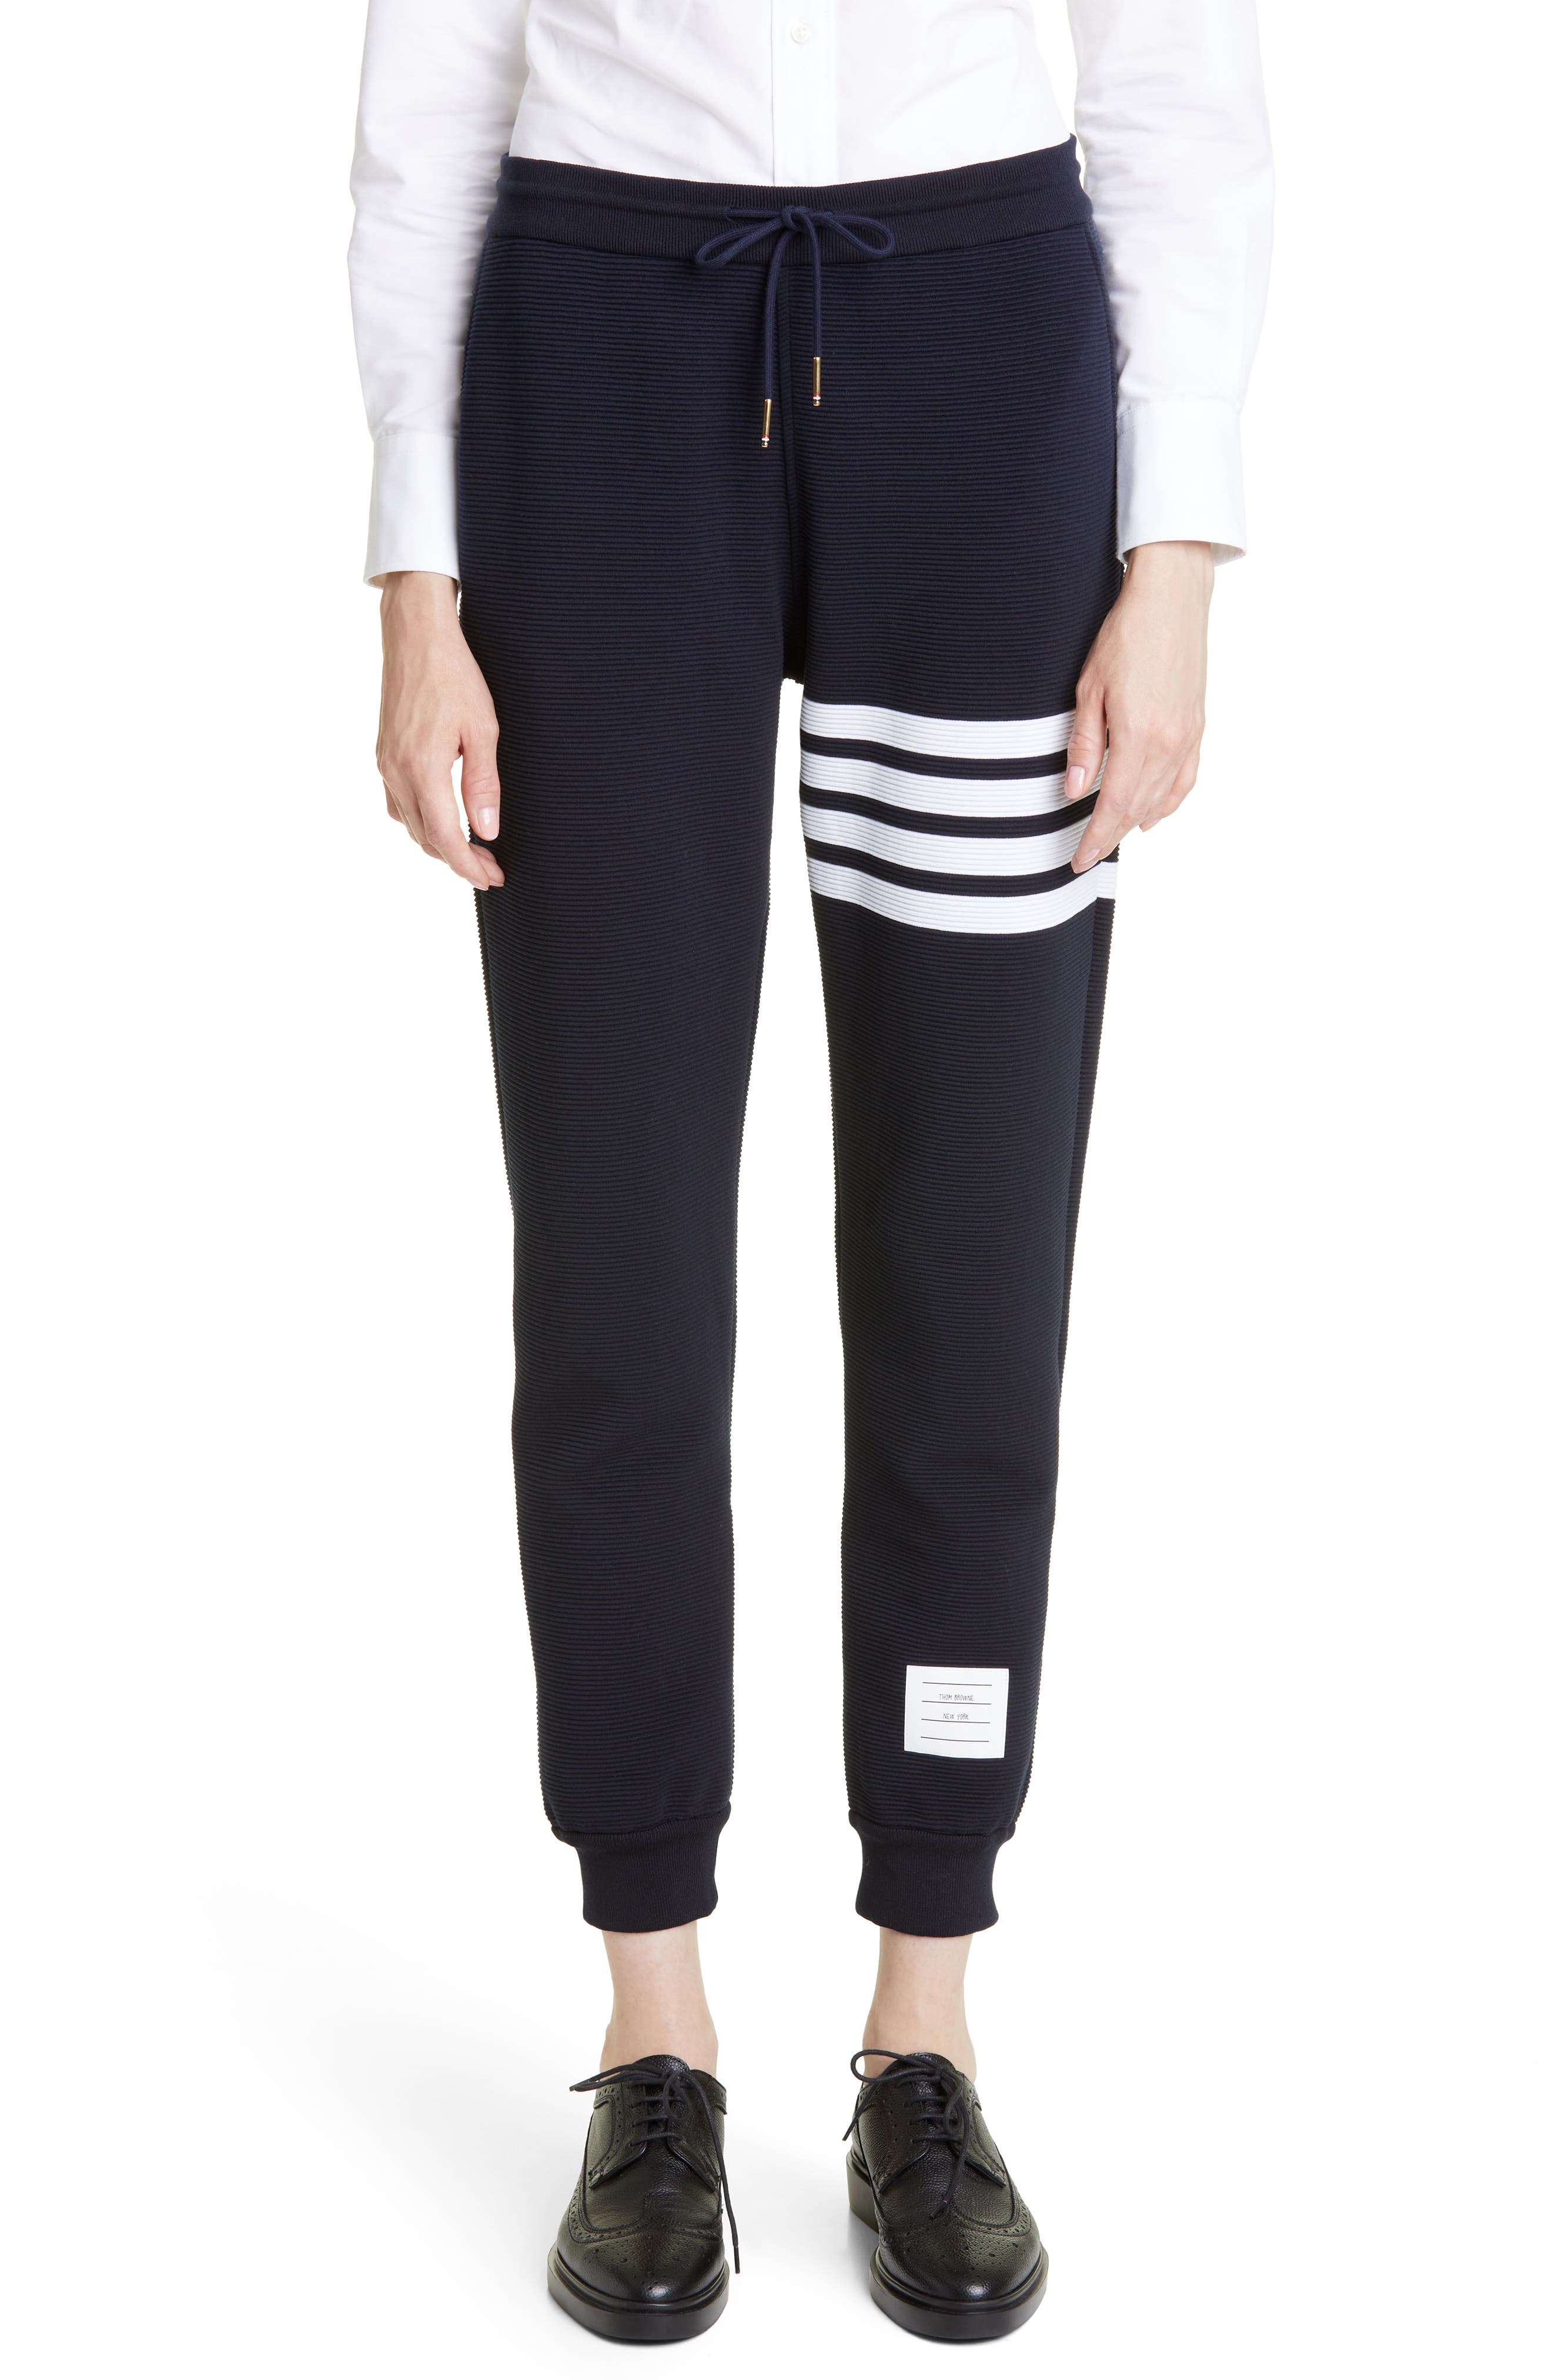 Thom Browne cropped tailored trousers - Orange